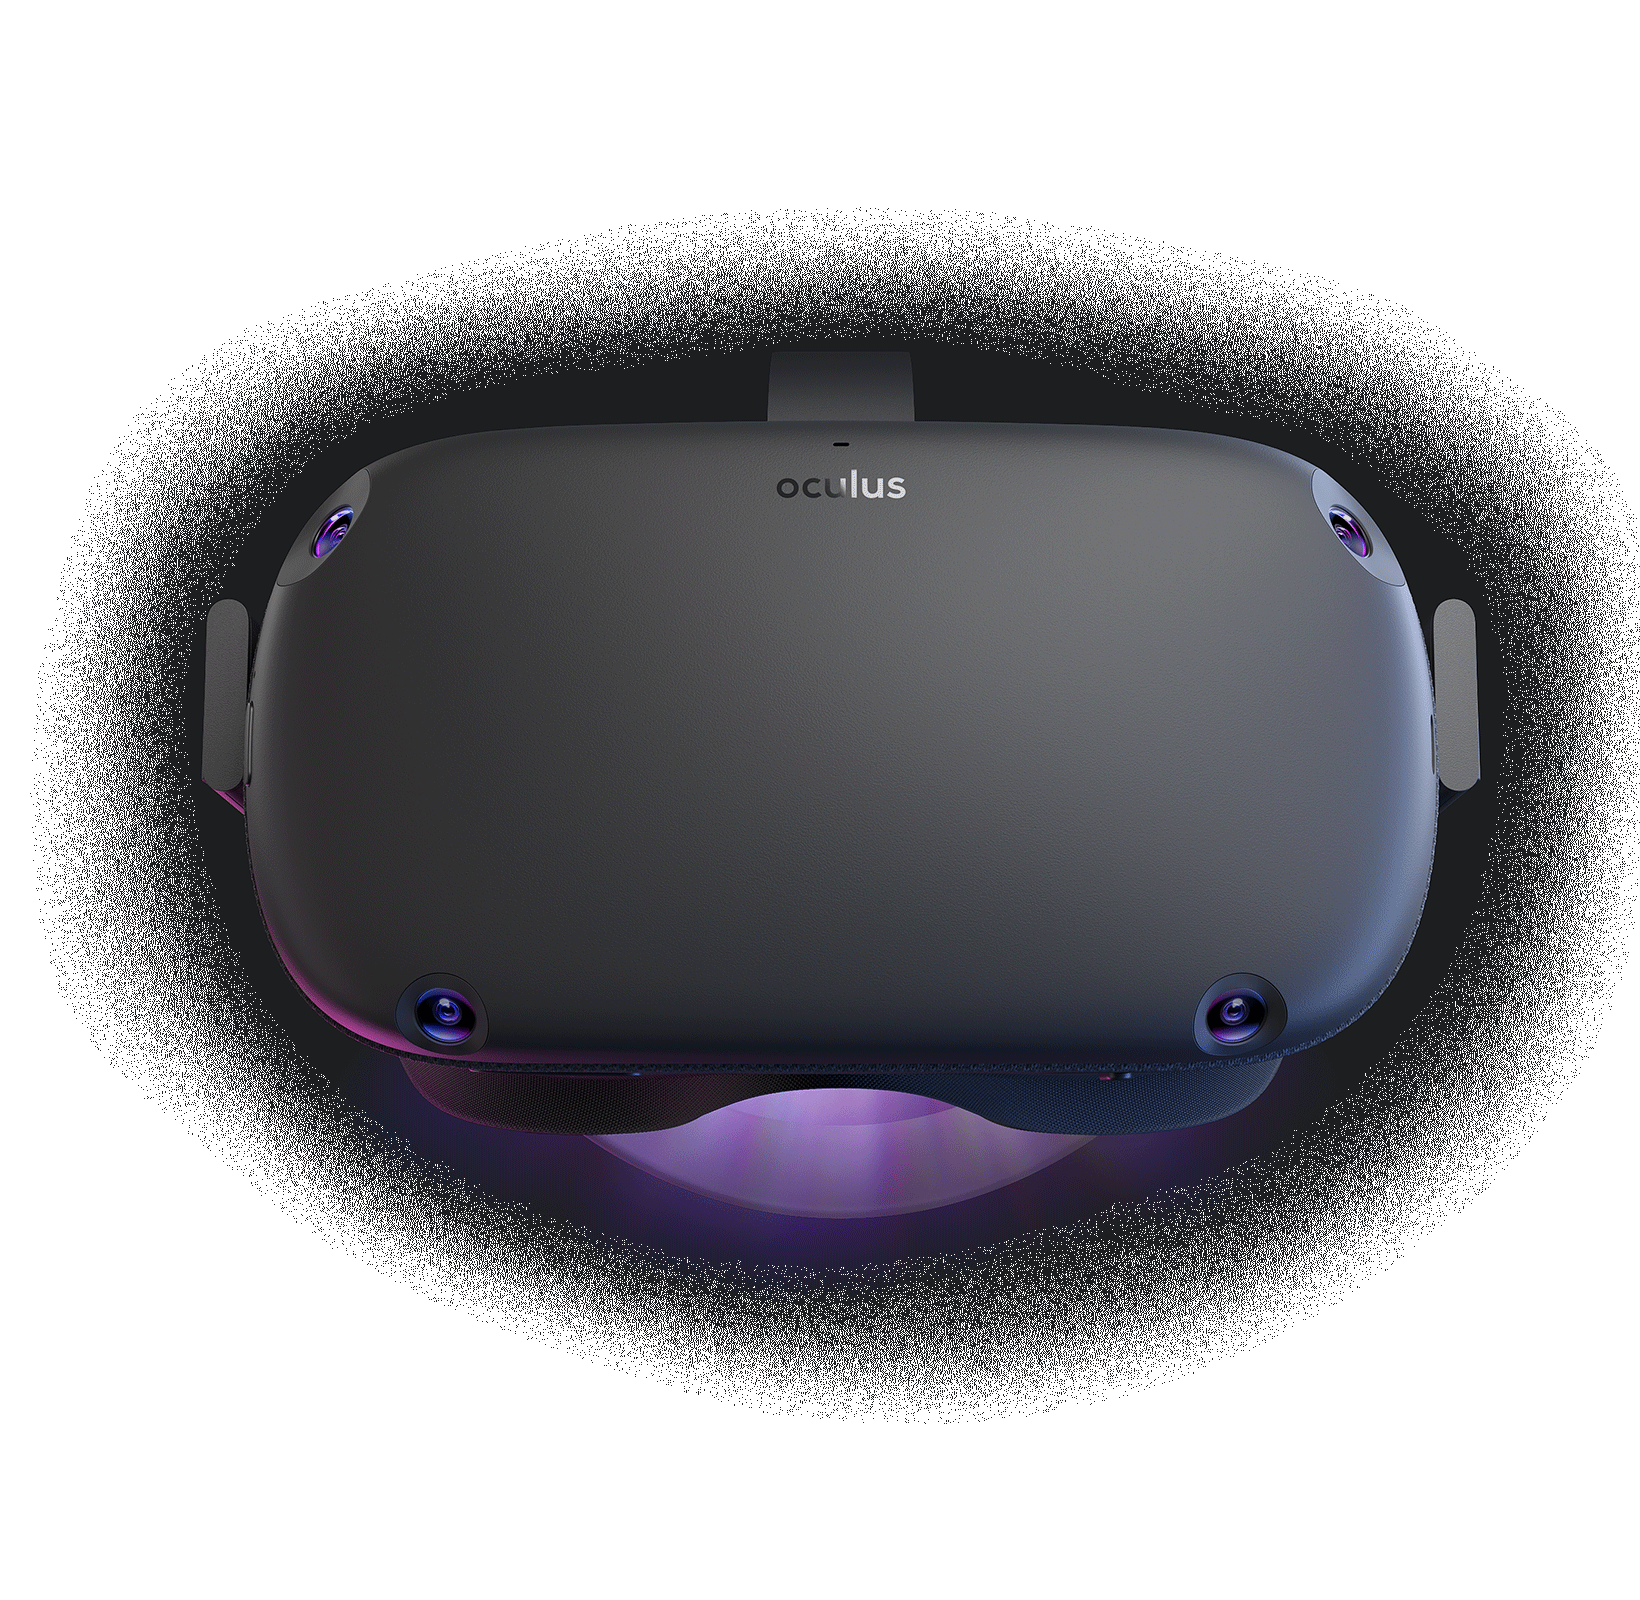 Oculus Quest now available, starts at $399 for a 64GB set